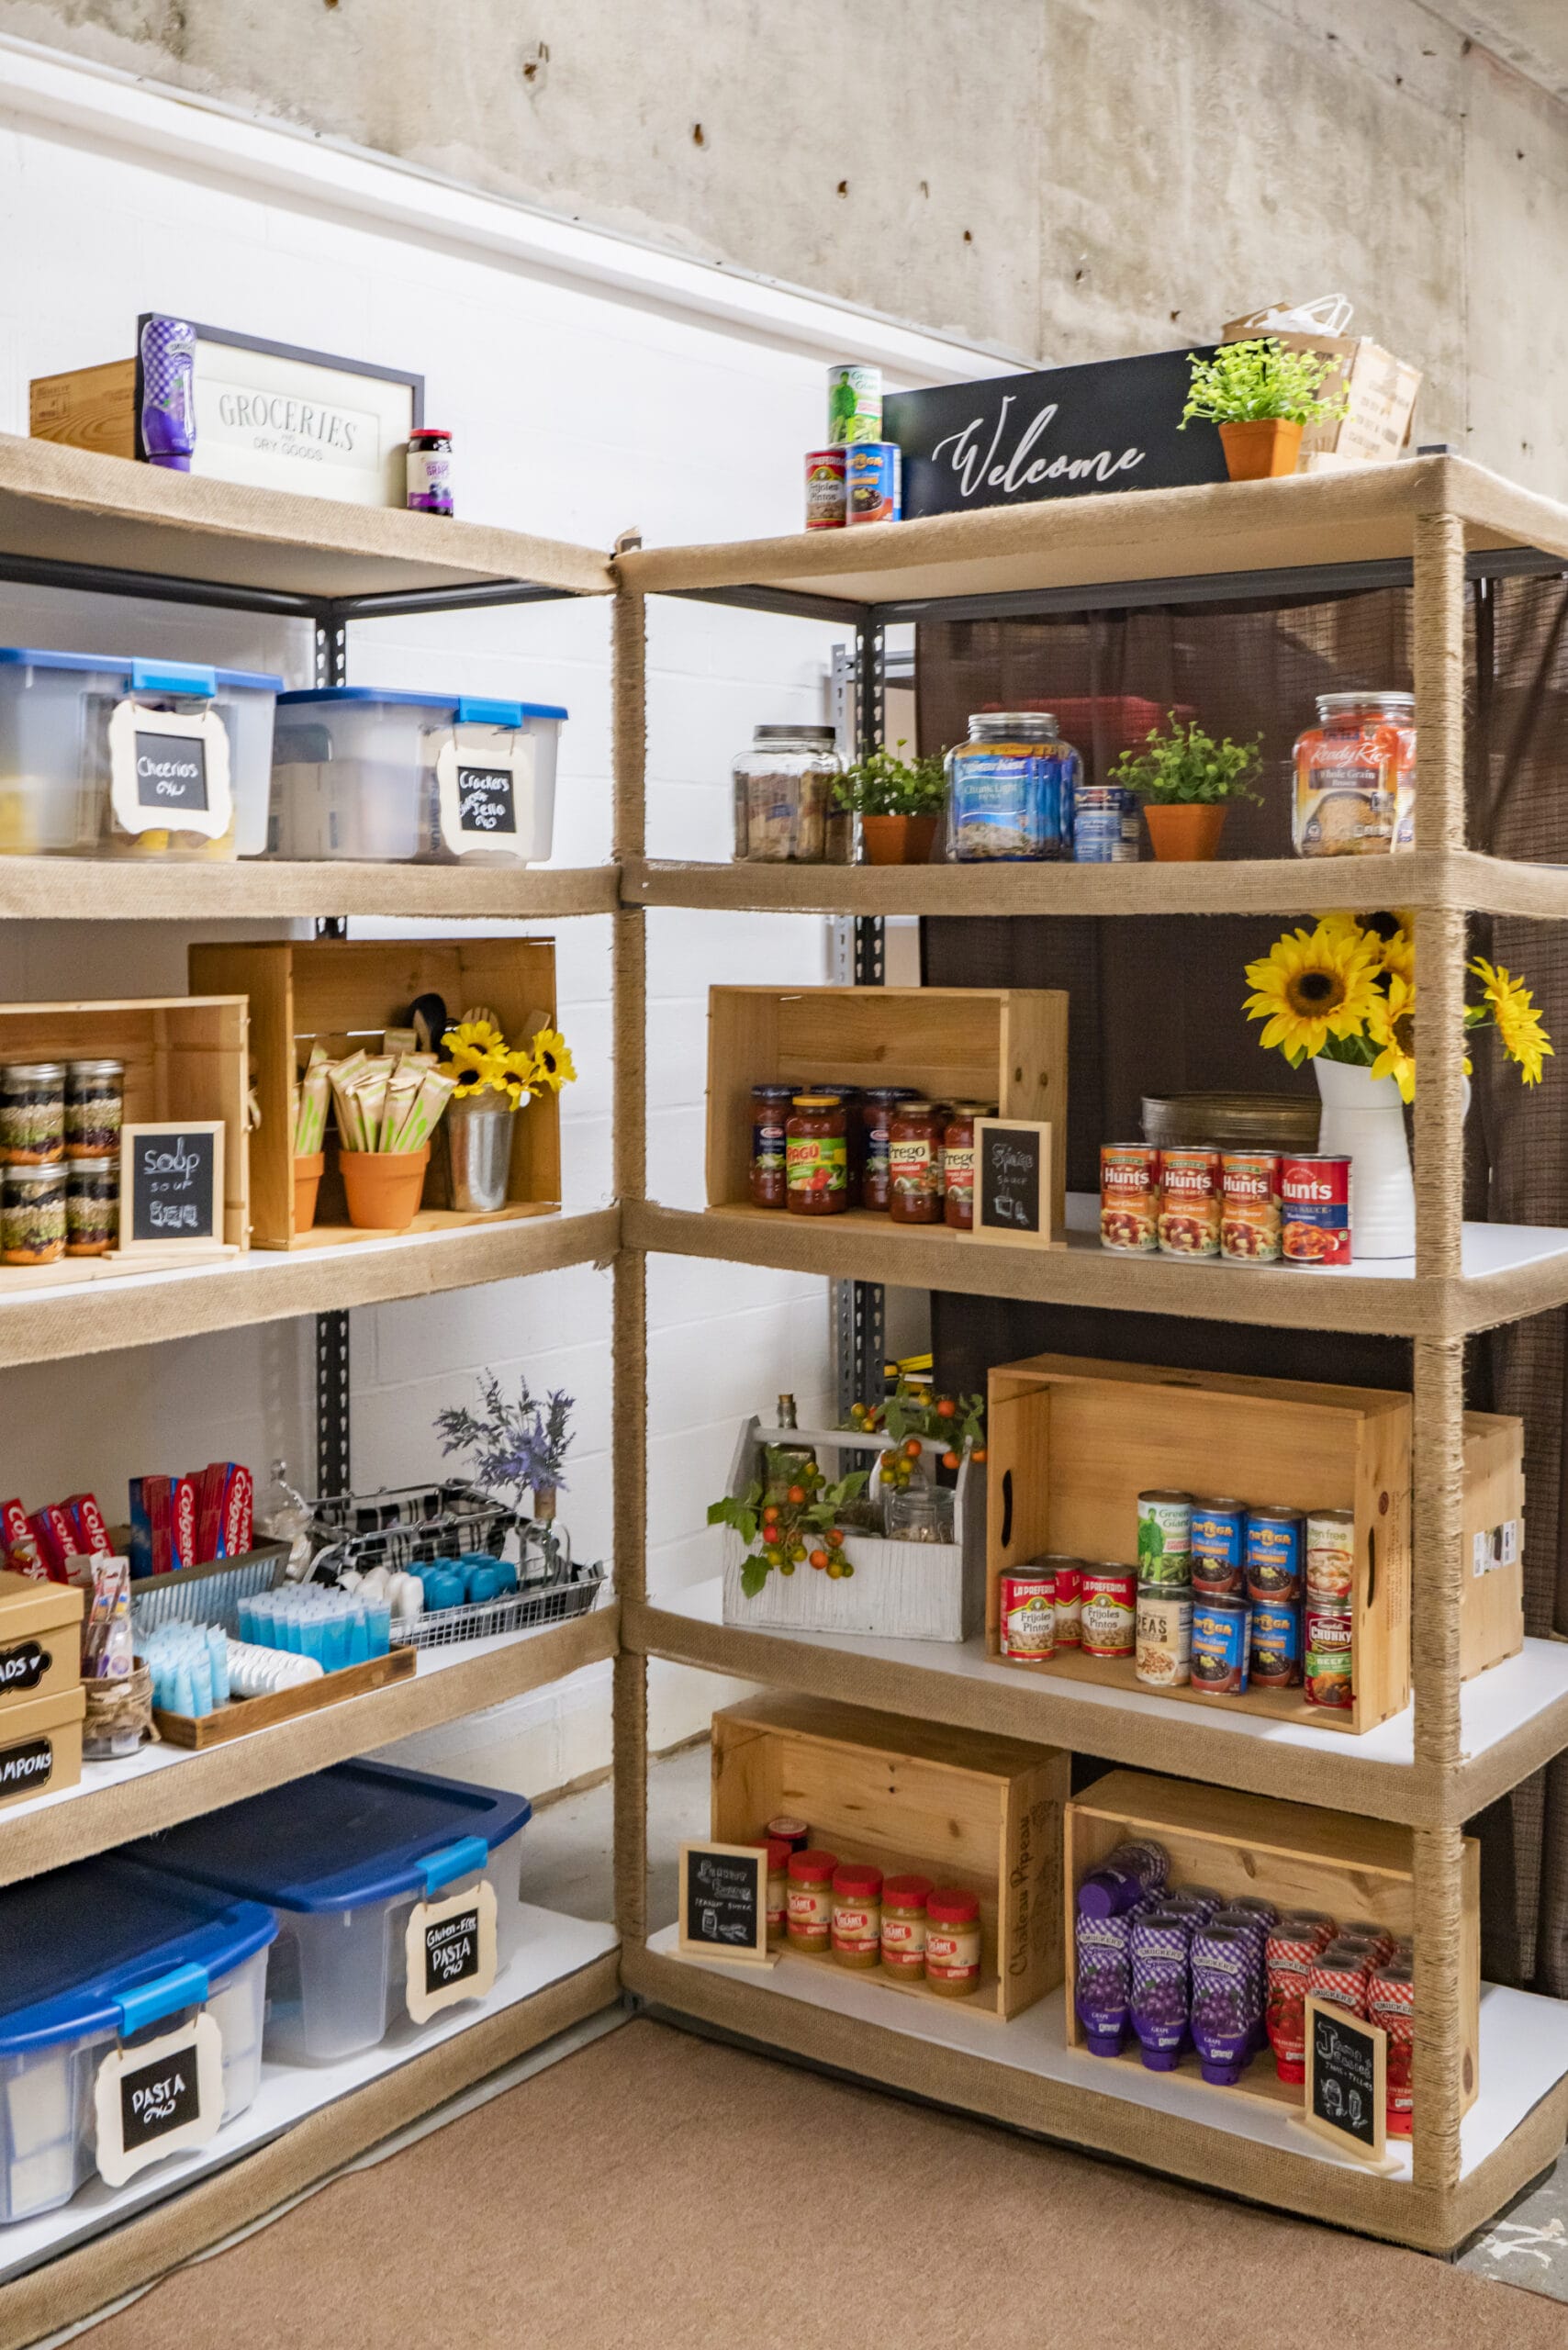 A brightly lit room with shelves of non-perishable foods and hygiene supplies.